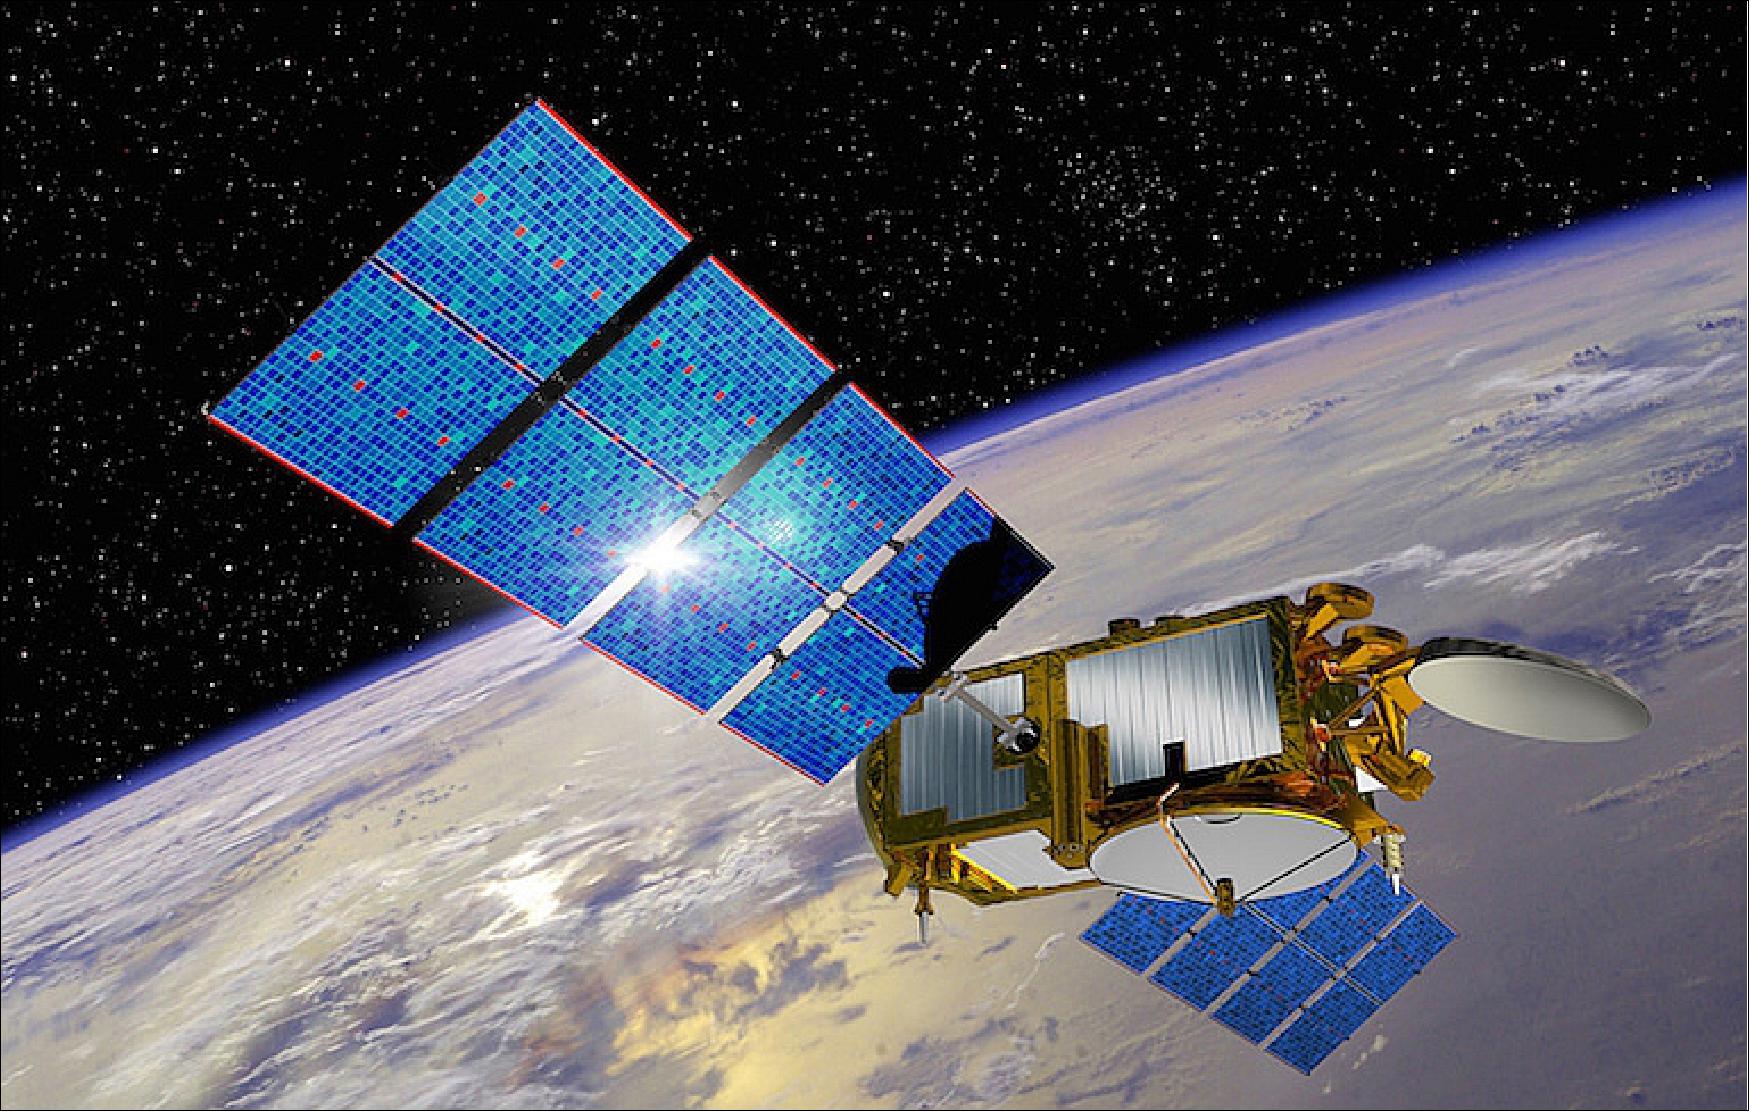 Figure 3: Artist's rendition of the deployed Jason-3 spacecraft (image credit: CNES)